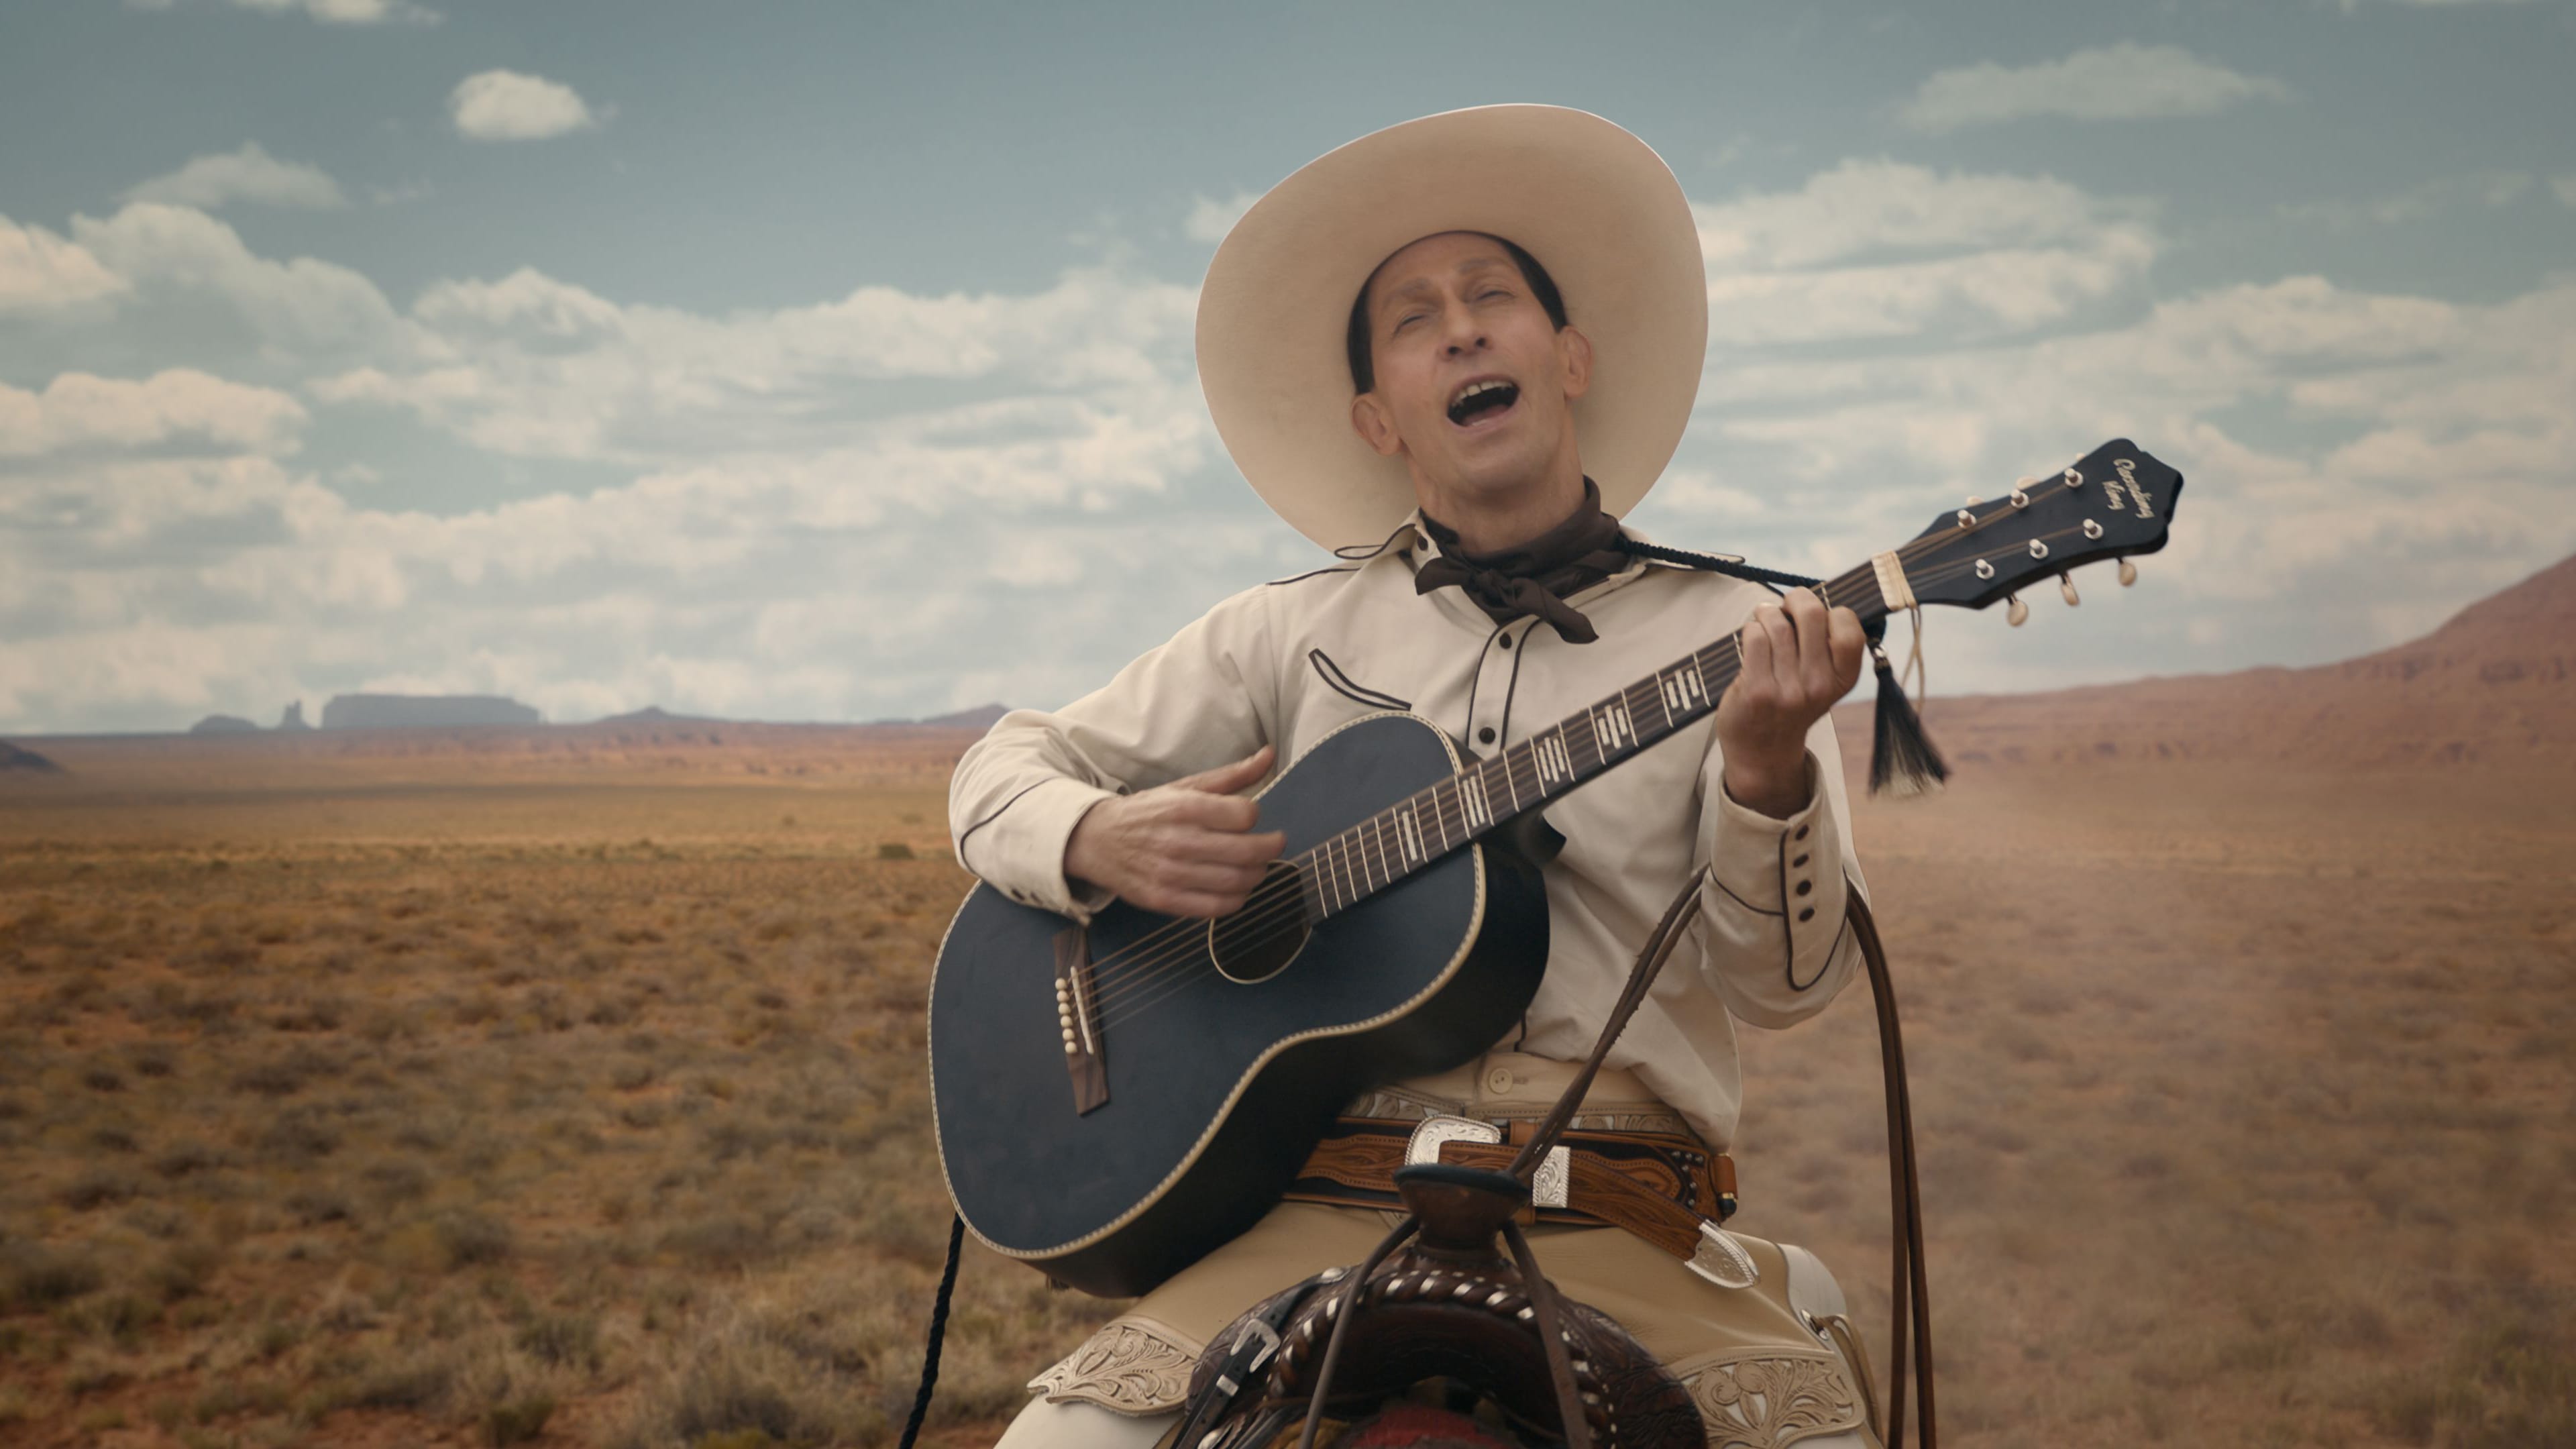 The Ballad of Buster Scruggs 2018 123movies